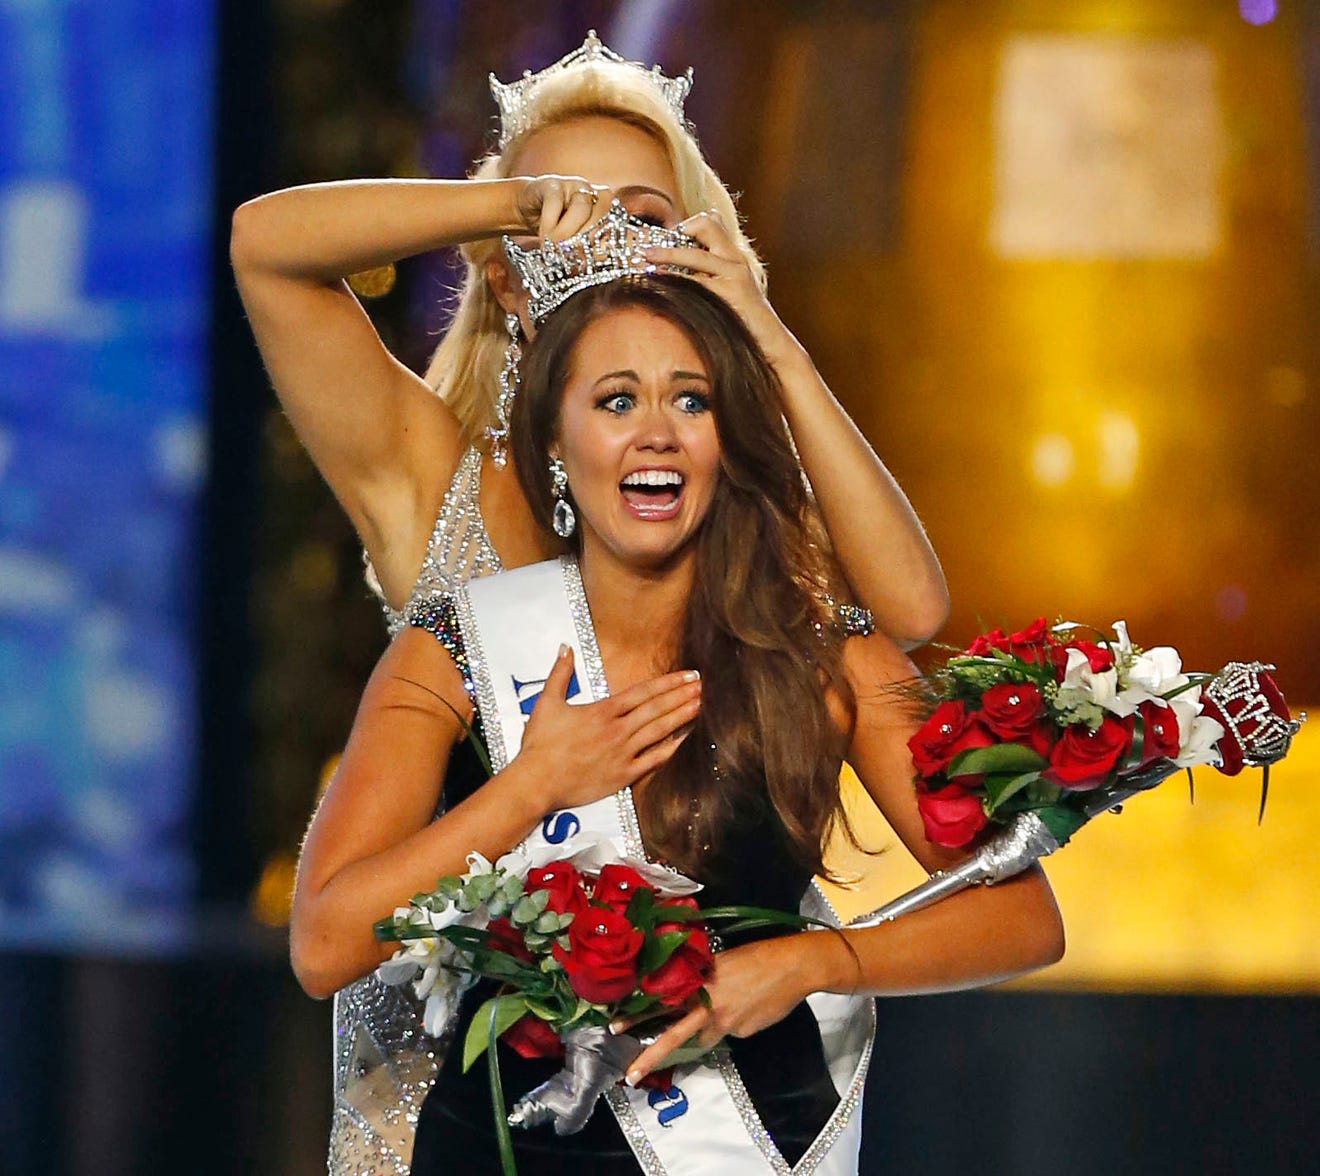 Miss America Cara Mund It's 'possible' Gretchen Carlson will fire me